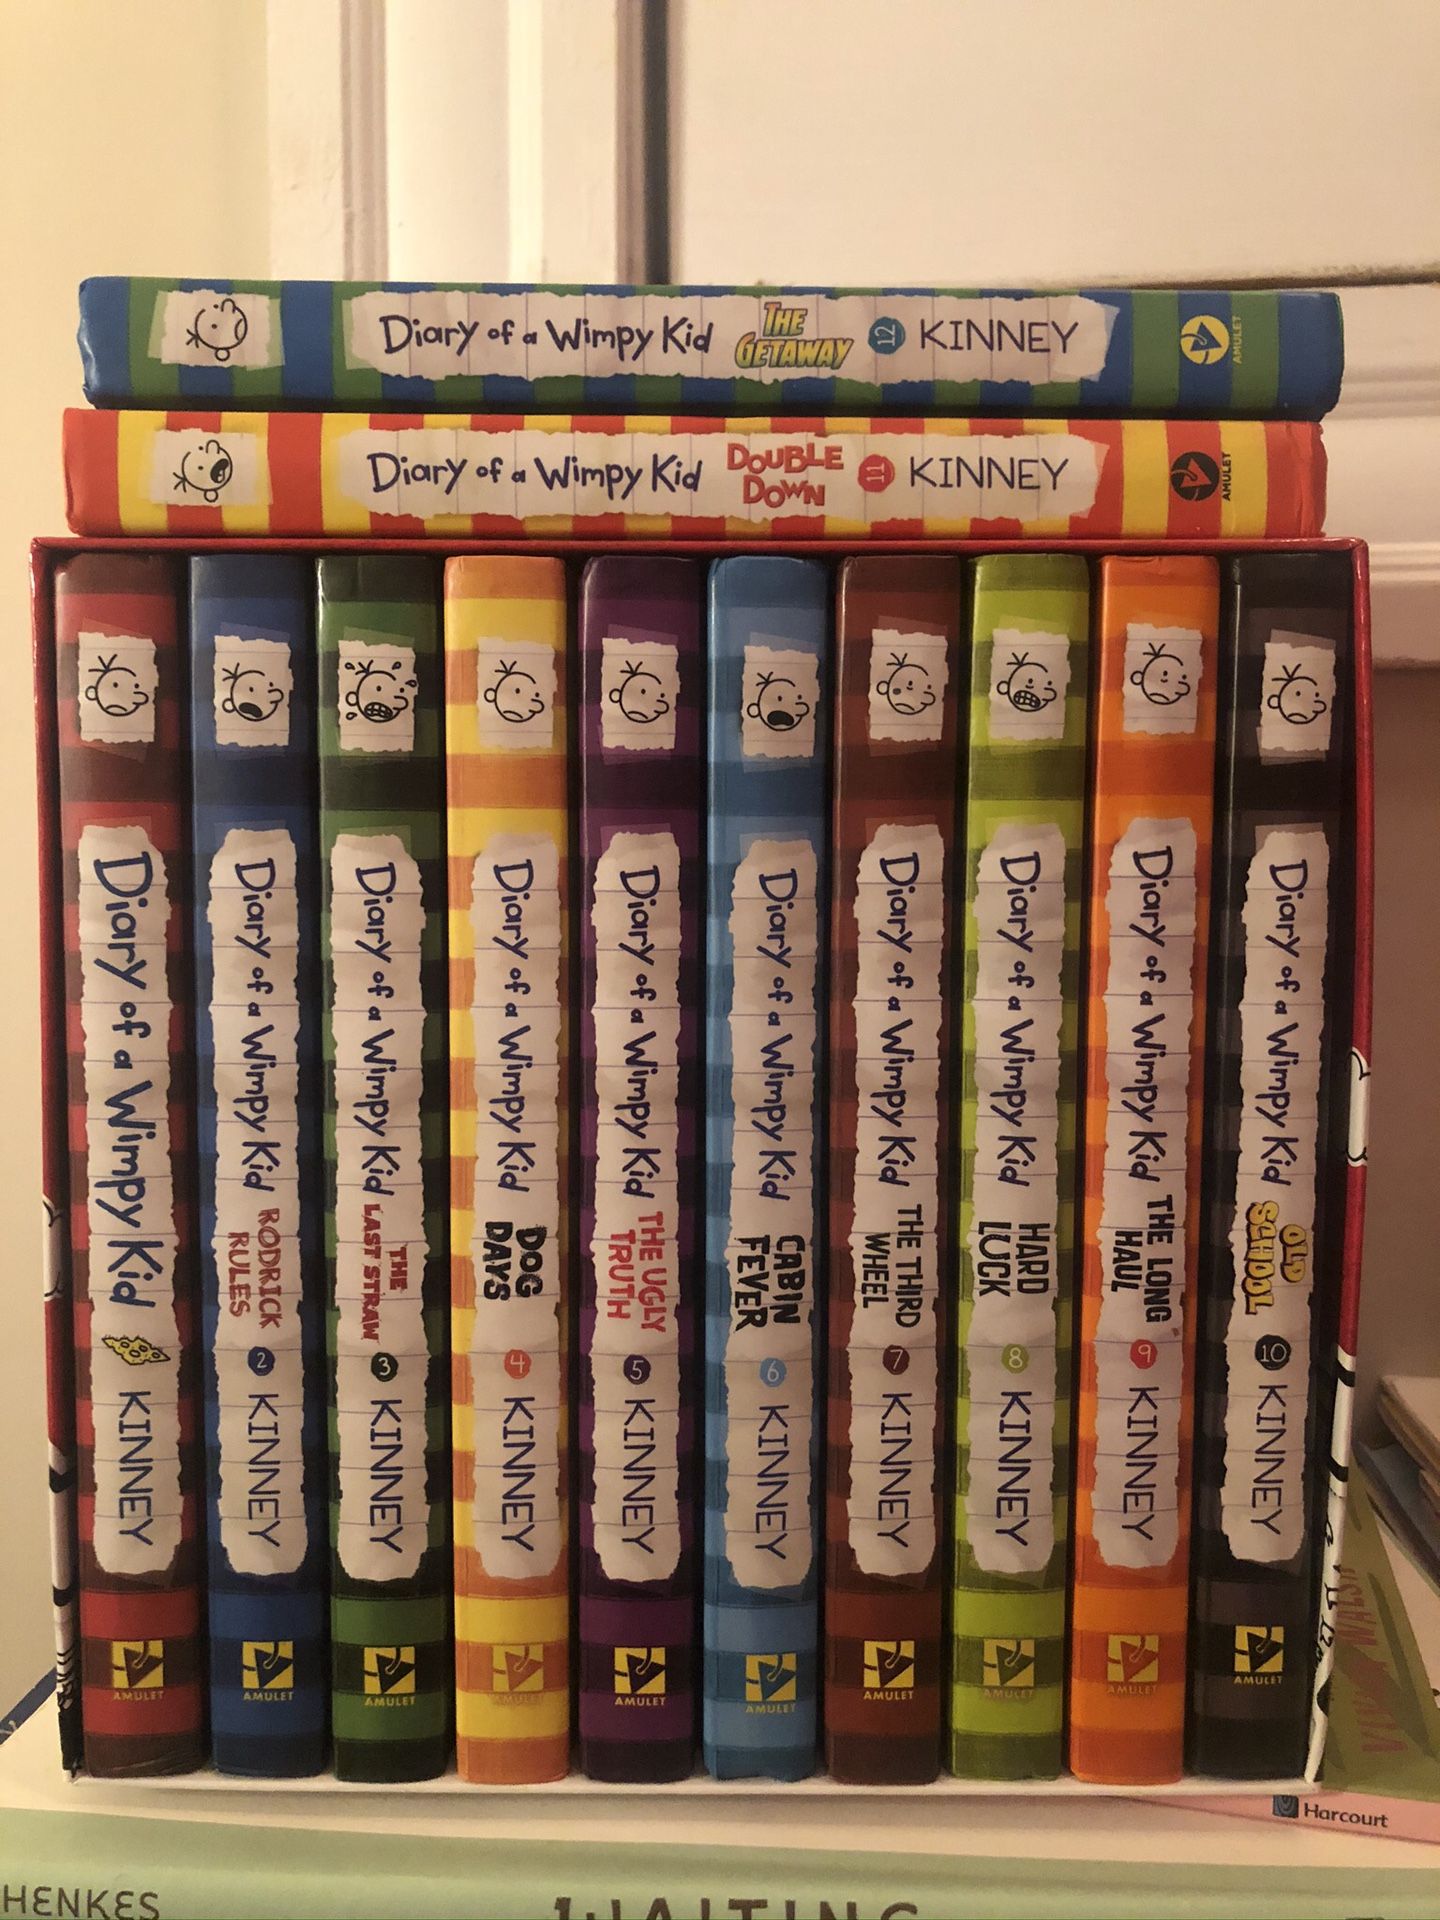 Diary of a Wimpy Kid collection plus 2 additional books